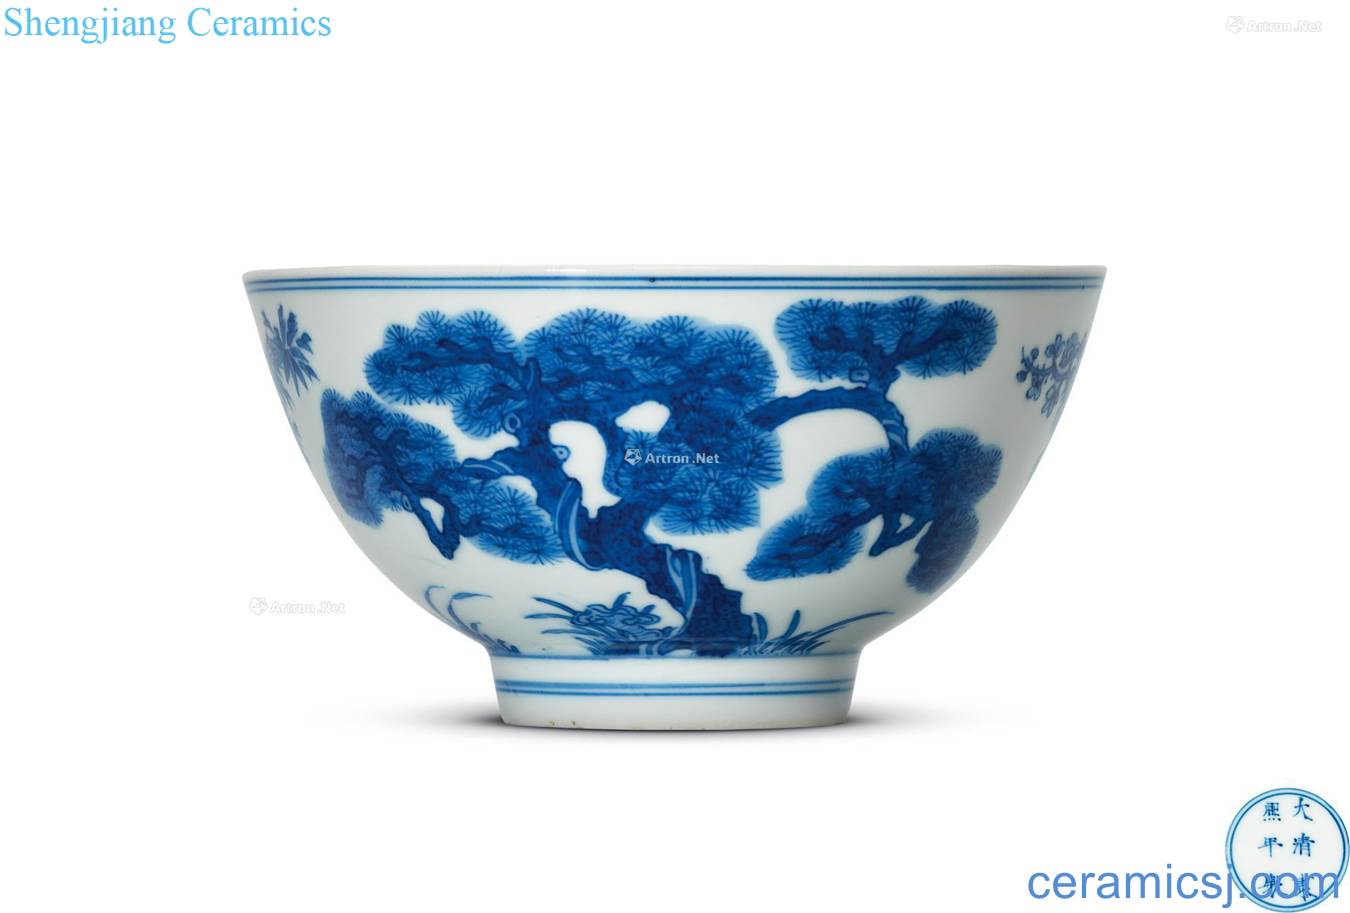 The qing emperor kangxi Blue and white, poetic figure bowl